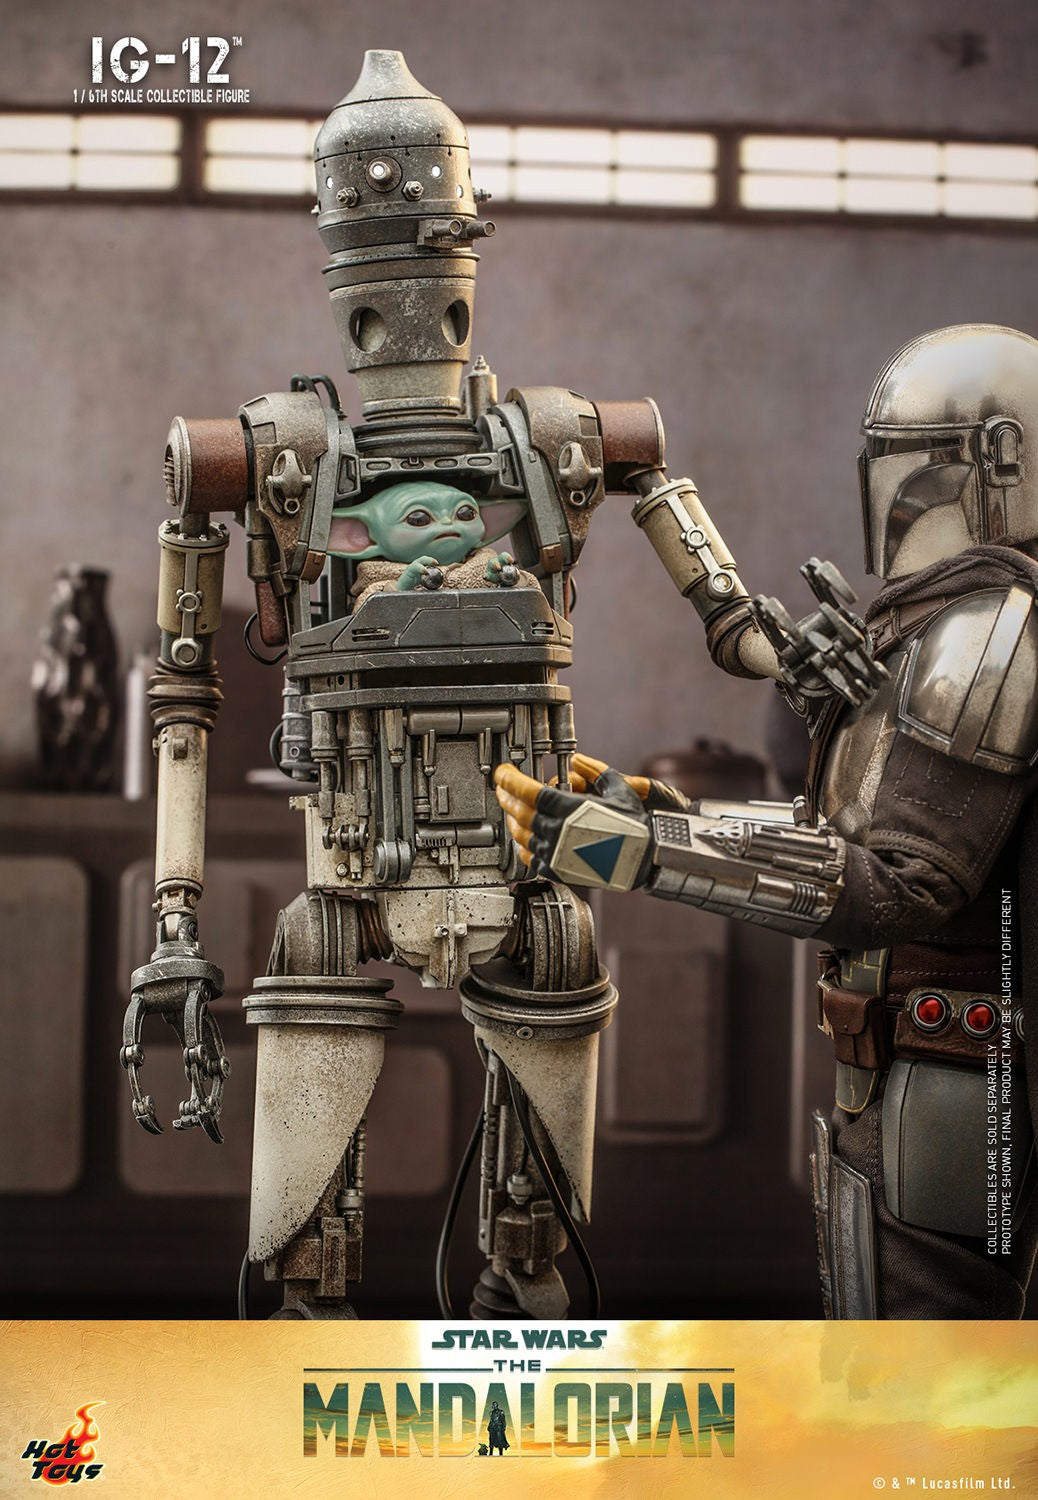 IG-12: With Accessories: Star Wars: The Mandalorian: Hot Toys